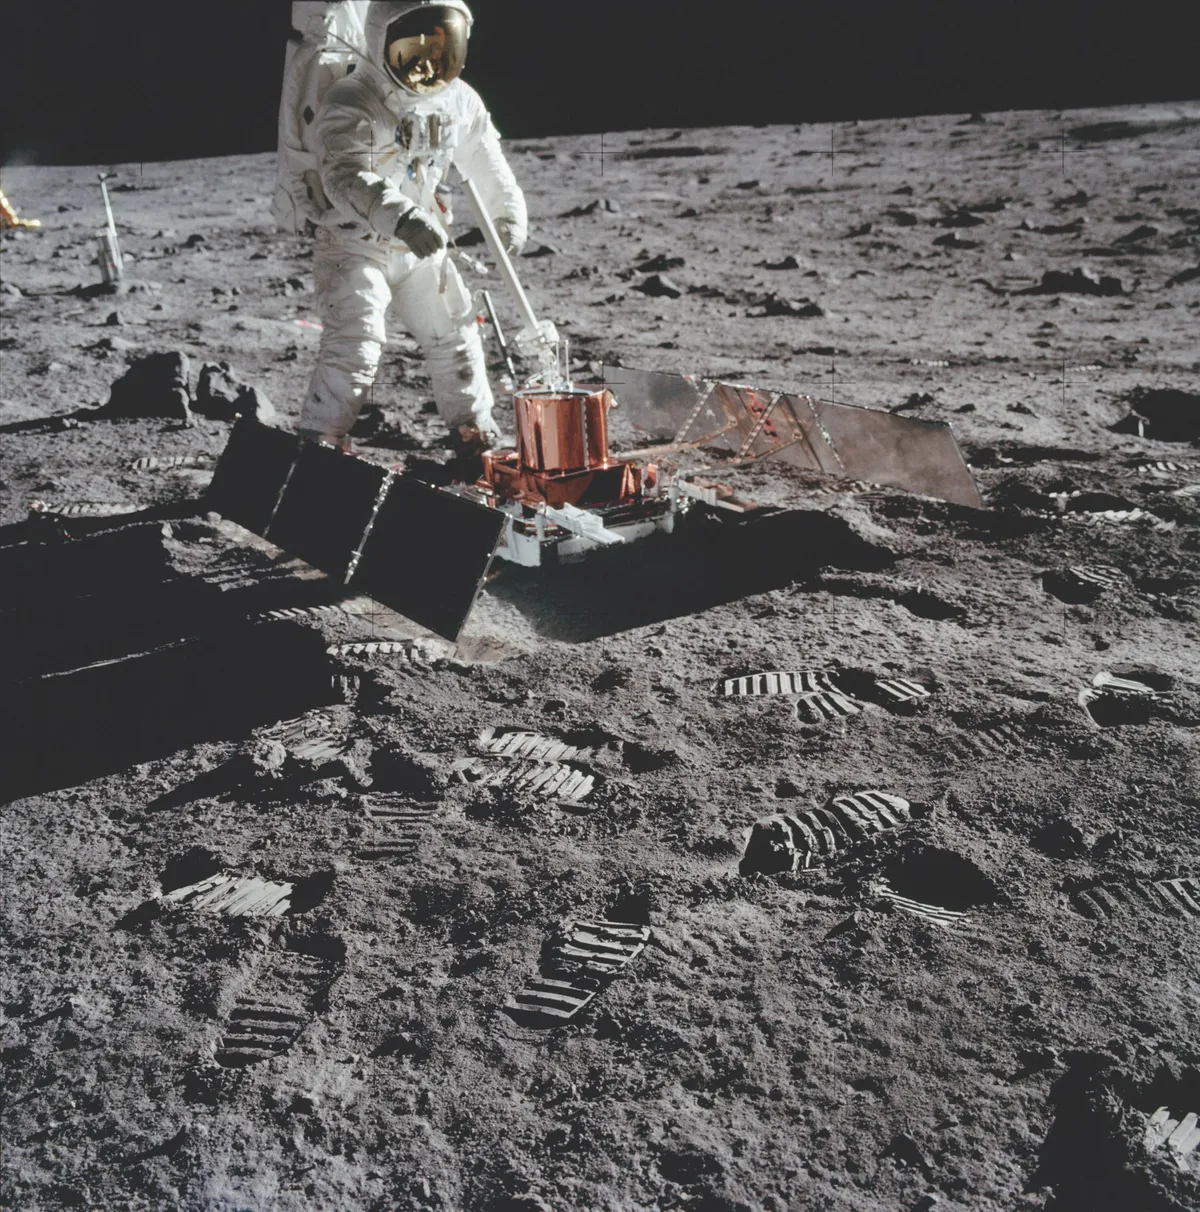 Four very sensitive seismometers measured moonquakes in the lunar crust or vibrations caused by meteorite impacts. Any relative motion was recorded as an electrical impulse and sent directly to Earth. Power came from two solar panels and a thermal shroud protected it from the extremes changes of temperature. The 21-day experiment found that seismic events on the Moon are less frequent than earthquakes on Earth. It also recorded erosion events, thought to be landslides along the walls of relatively young craters. © NASA/JPL